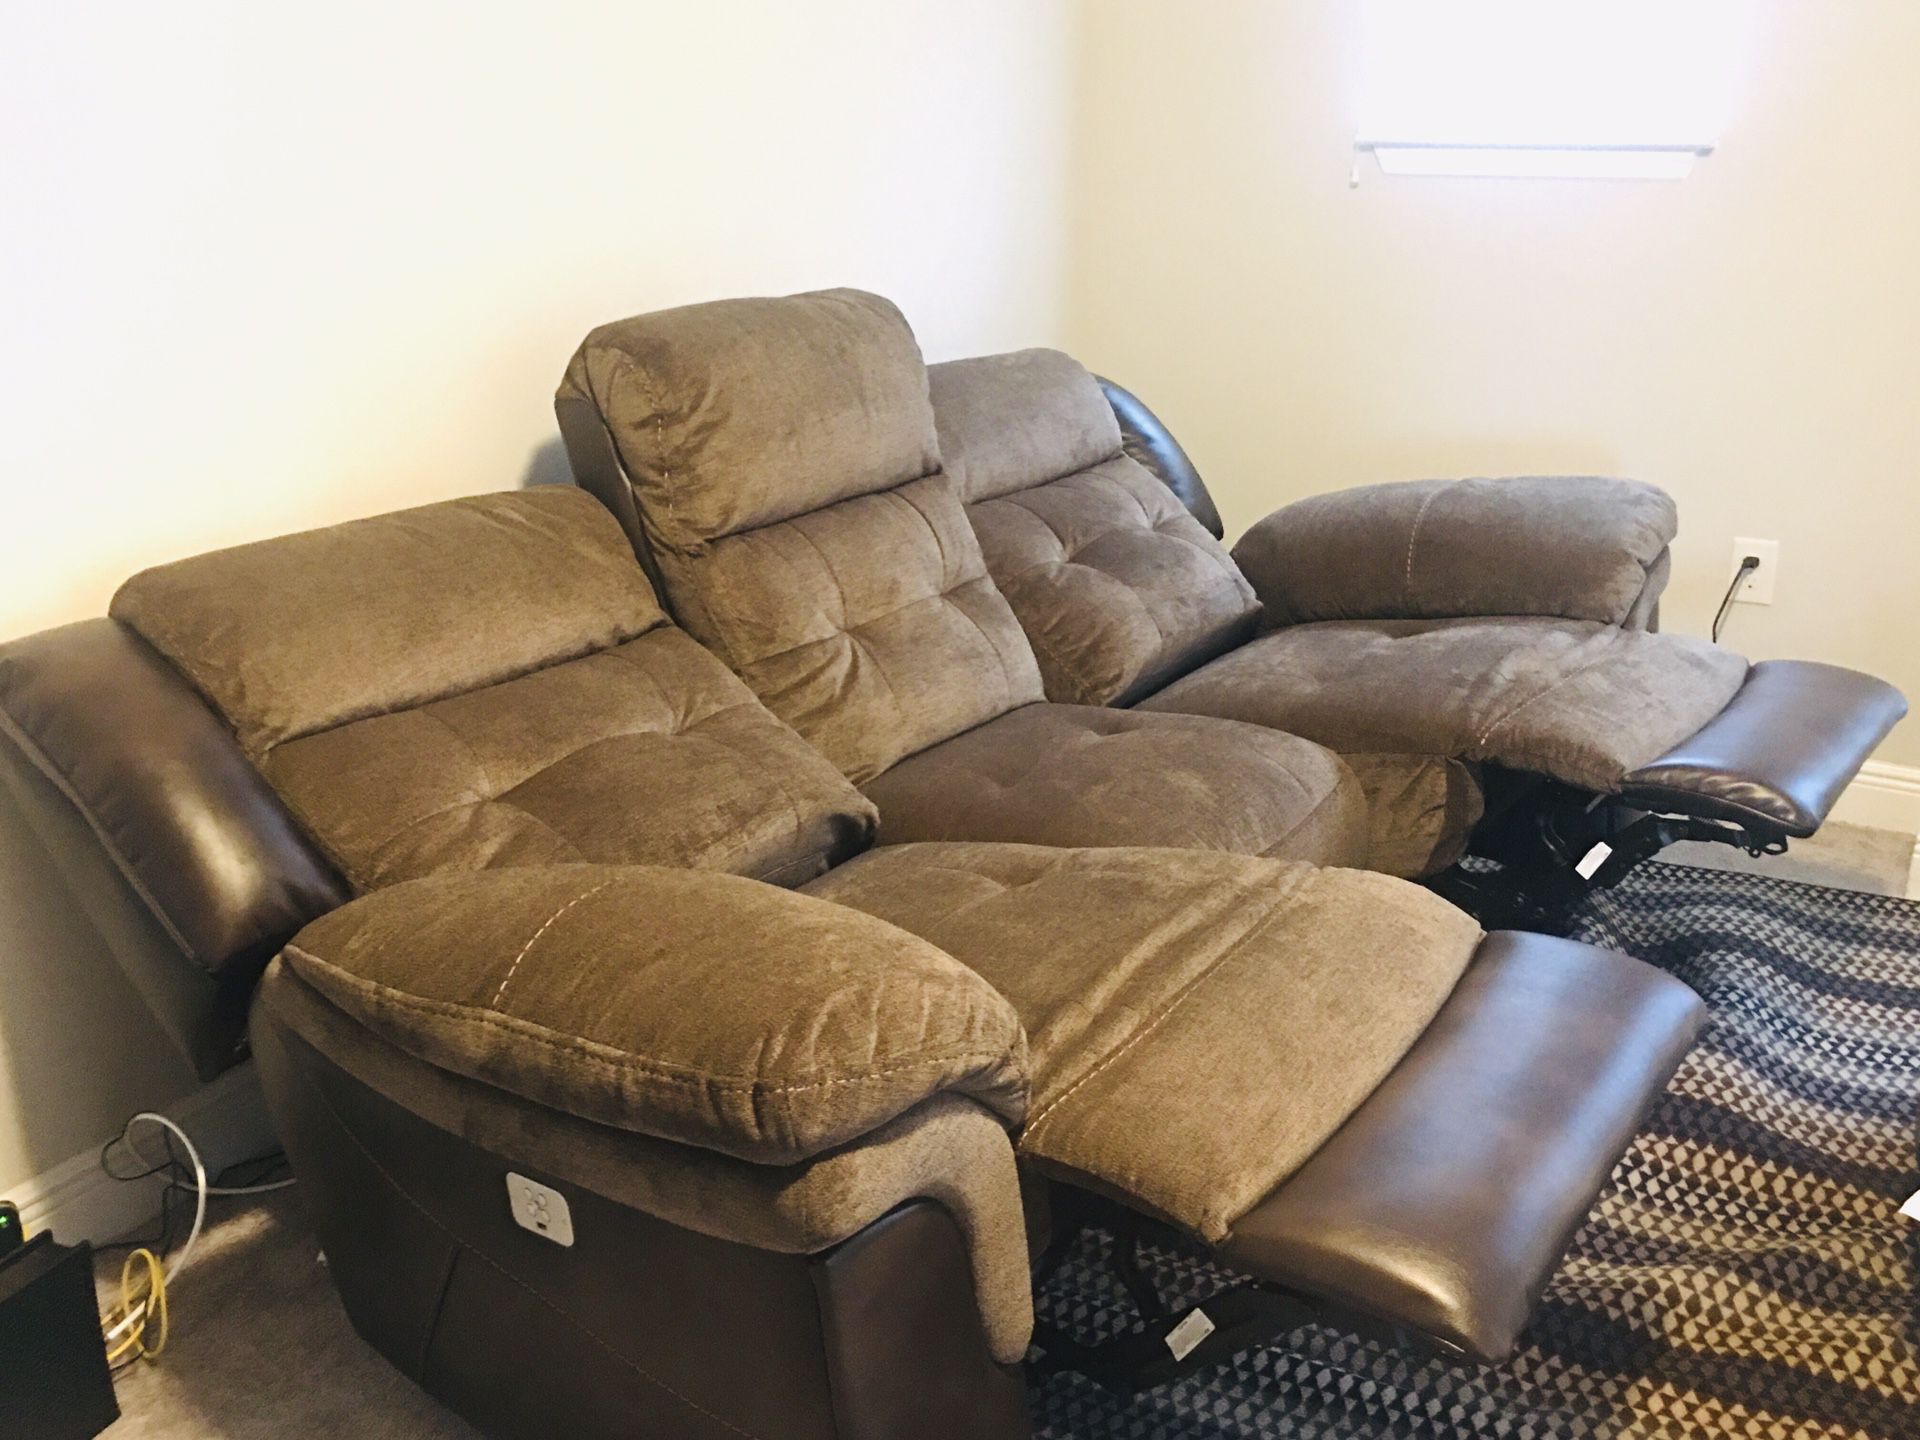 Brand new Recliner sofa for sale for very low price